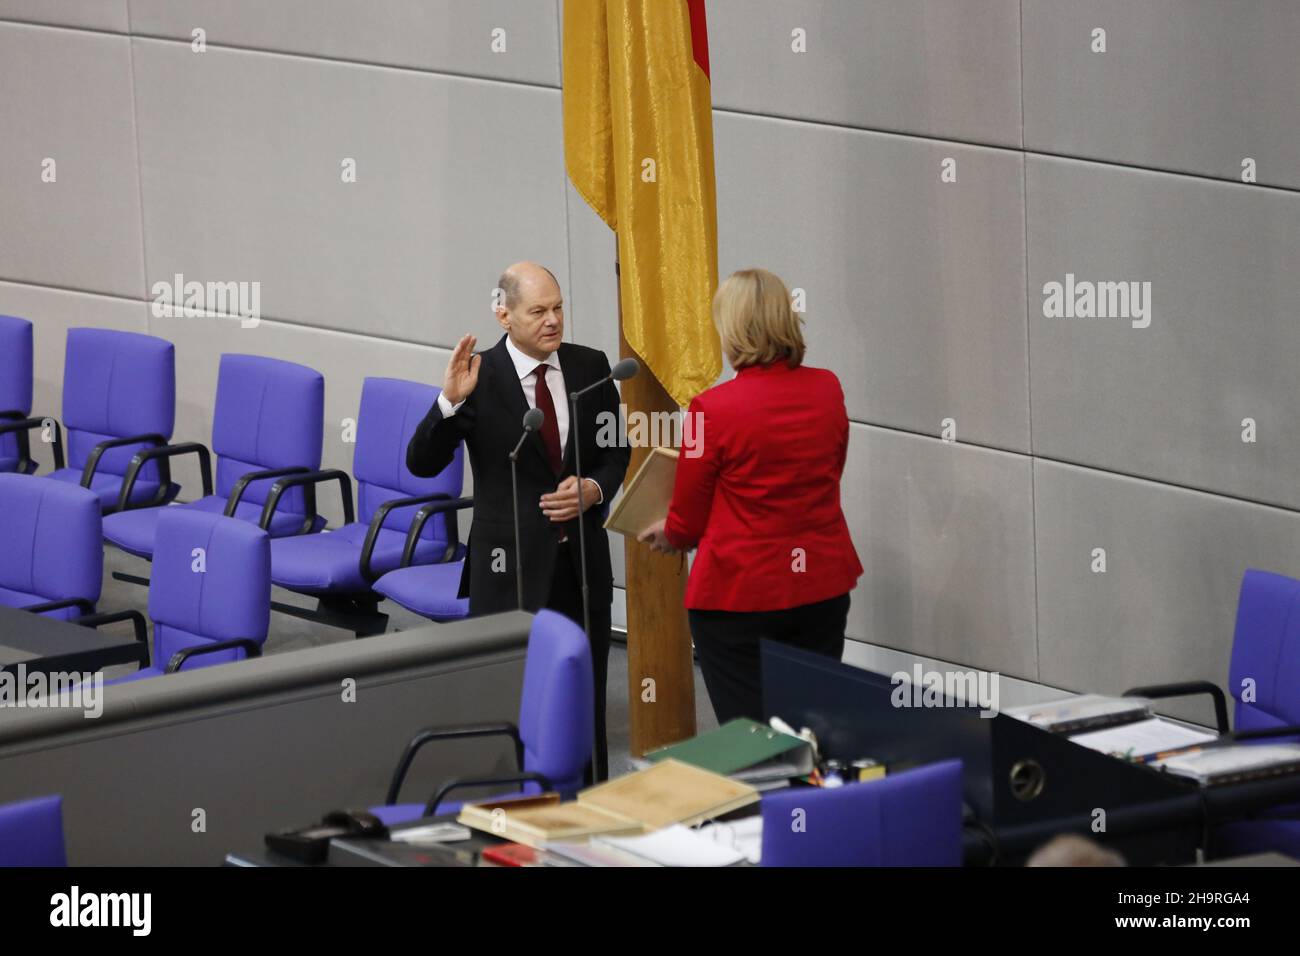 12/08/2021, Berlin, Germany, Olaf Scholz and Bärbel Bas in the plenary hall. Olaf Scholz will take his oath of office as Federal Chancellor on December 8th, 2021 with the President of the Bundestag Bärbel Bas in the Bundestag. Stock Photo